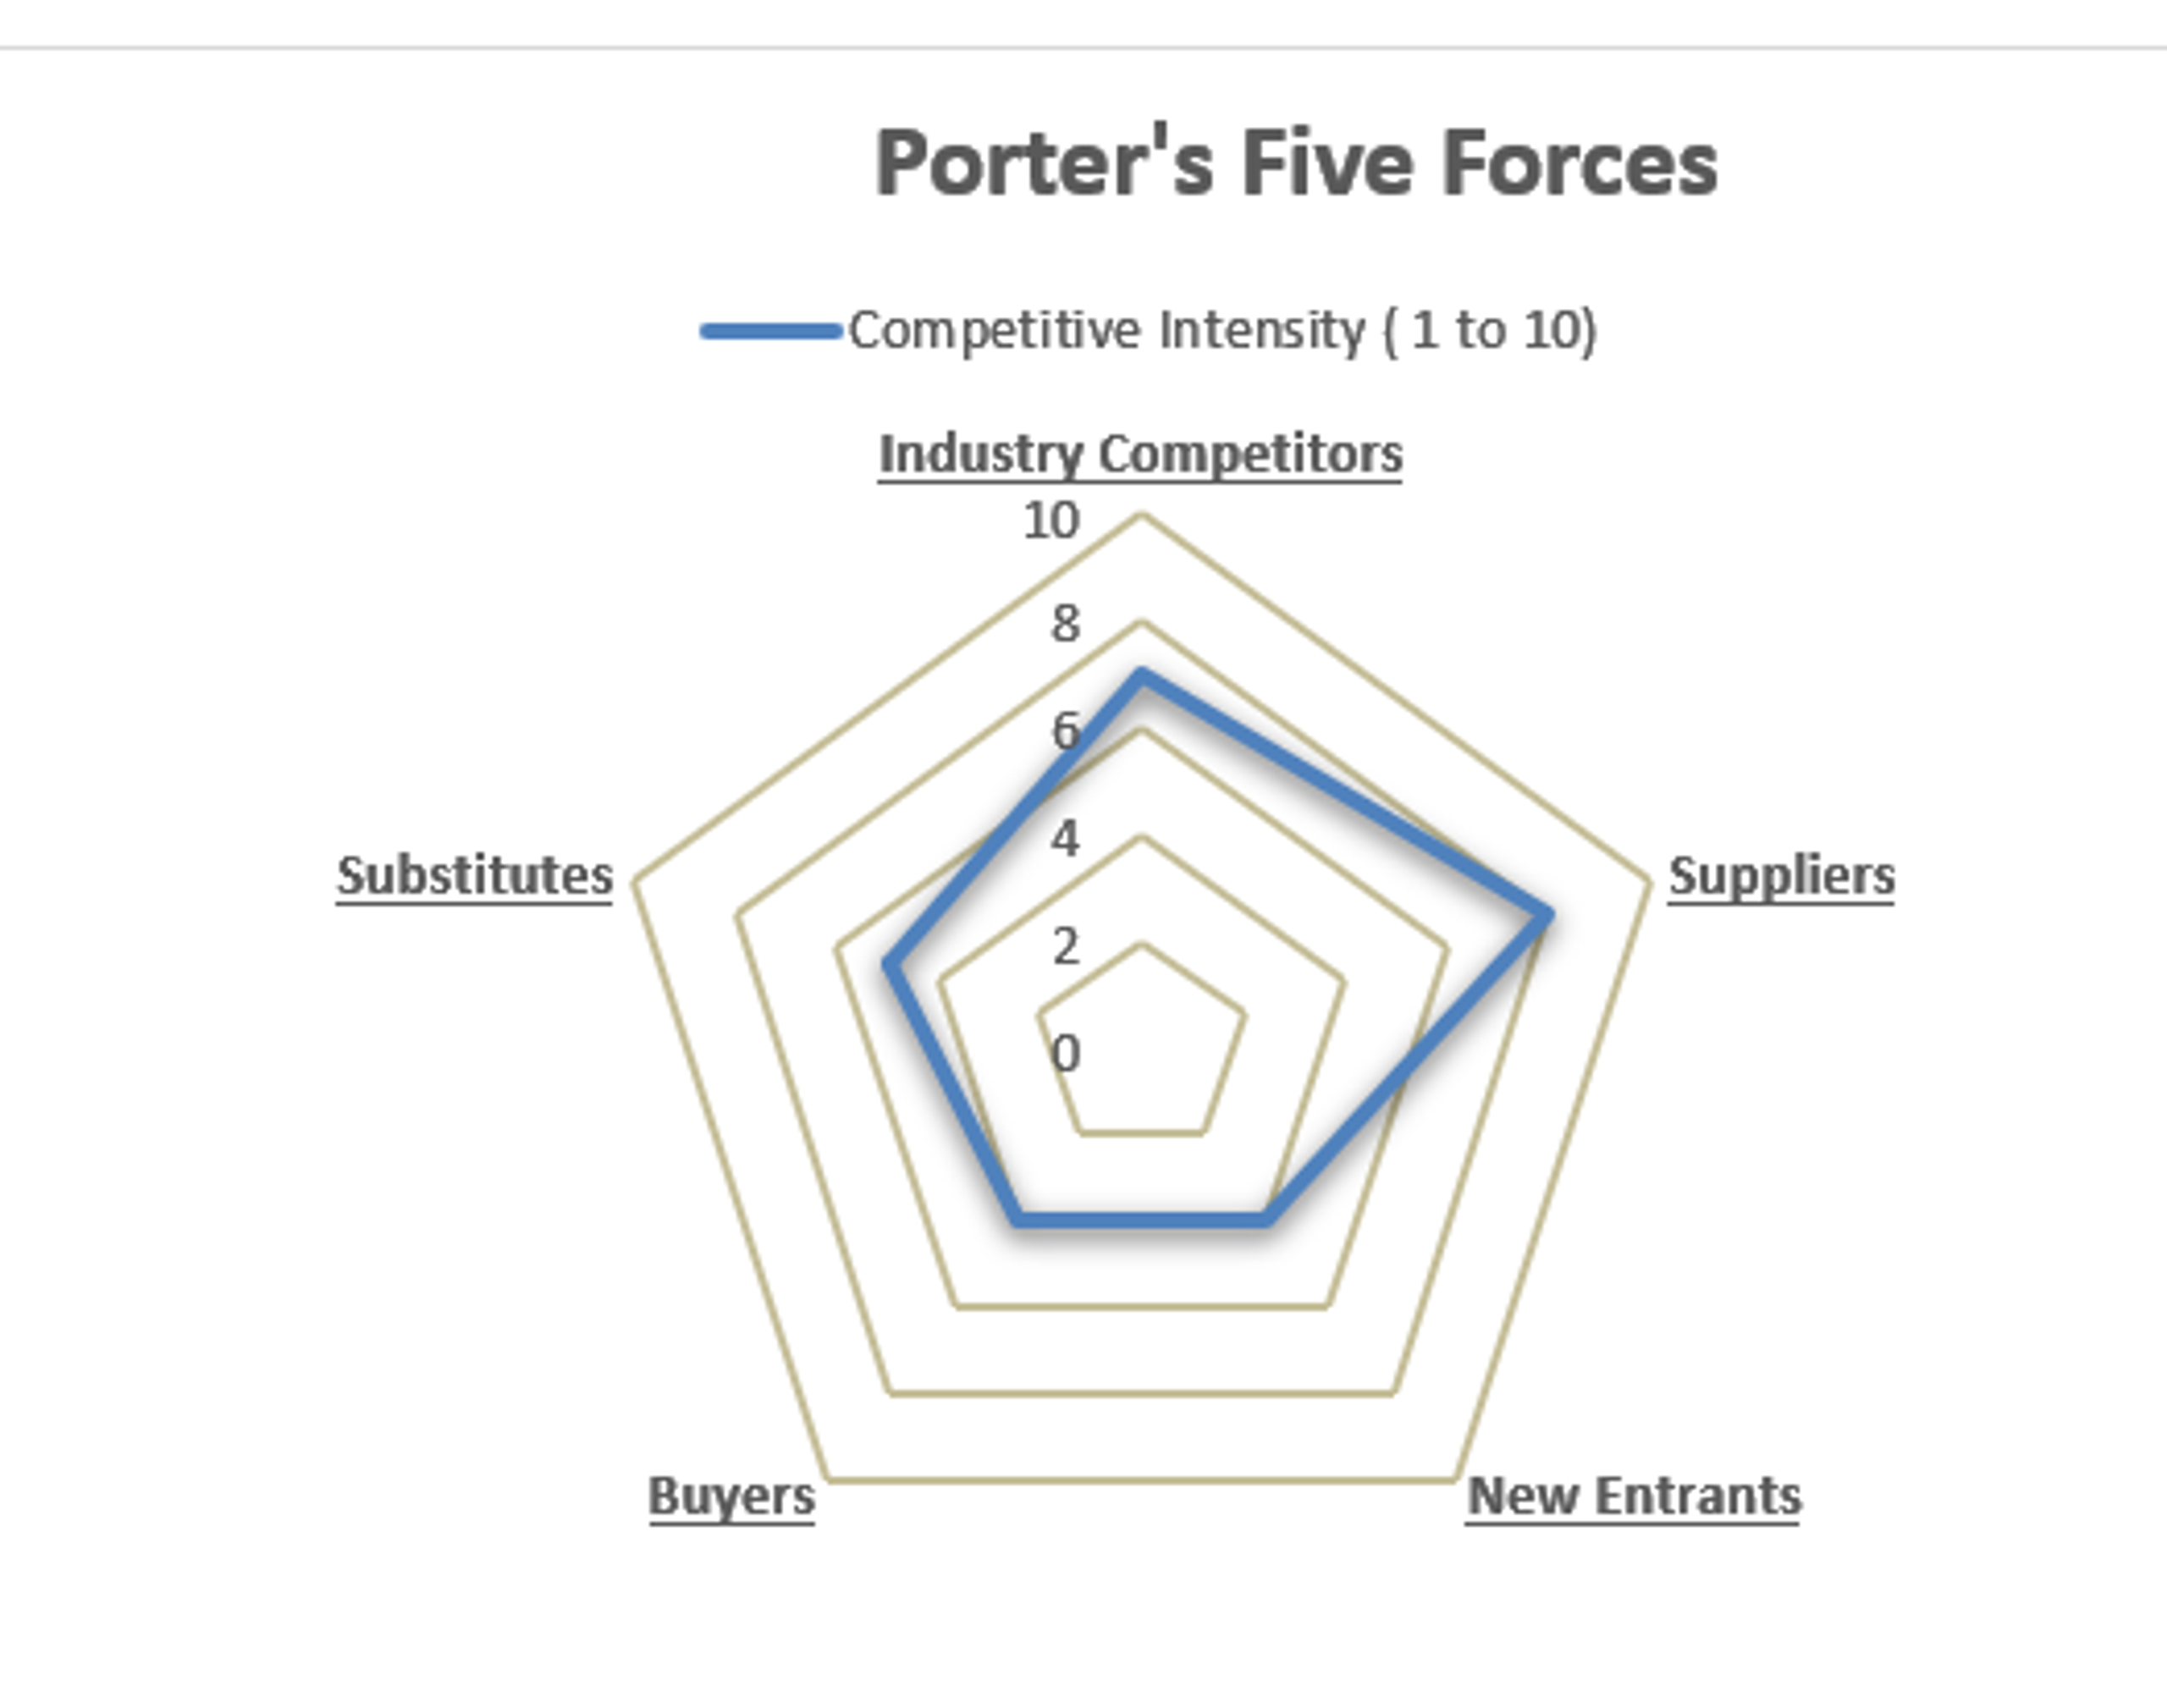 Porters Five Competitive Forces MS Word Template